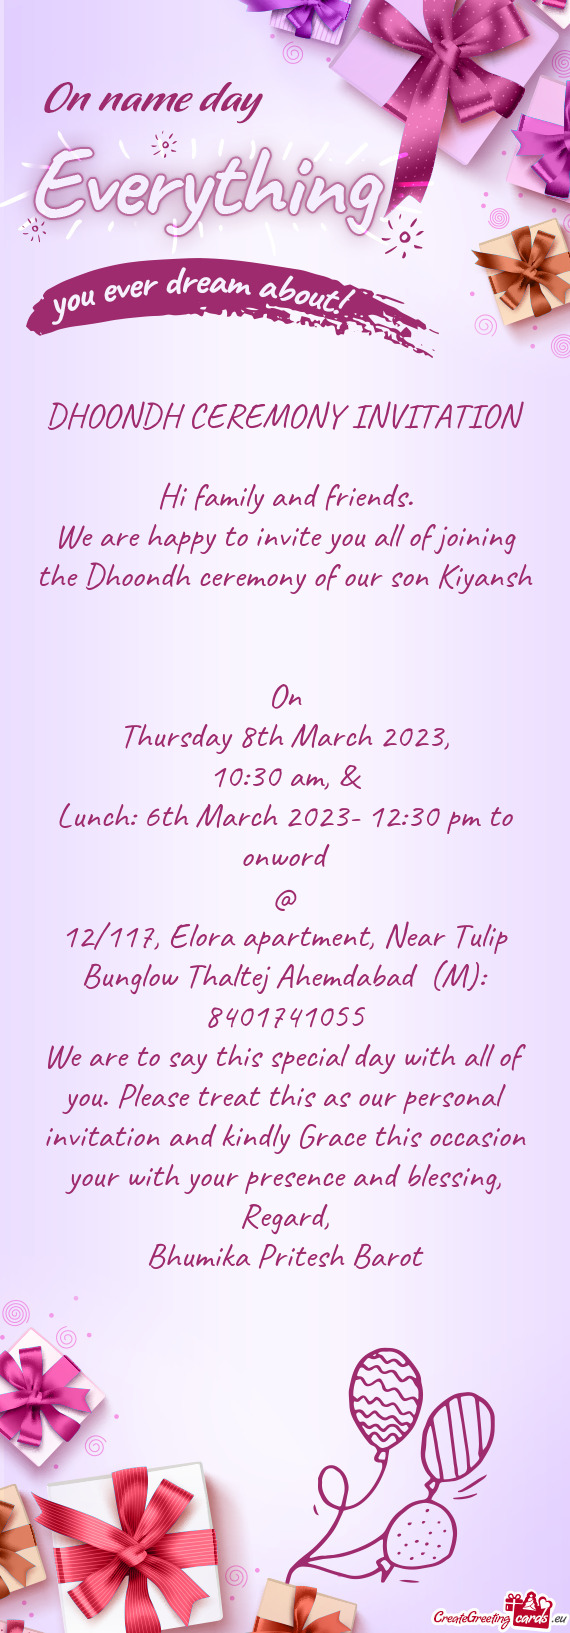 We are happy to invite you all of joining the Dhoondh ceremony of our son Kiyansh